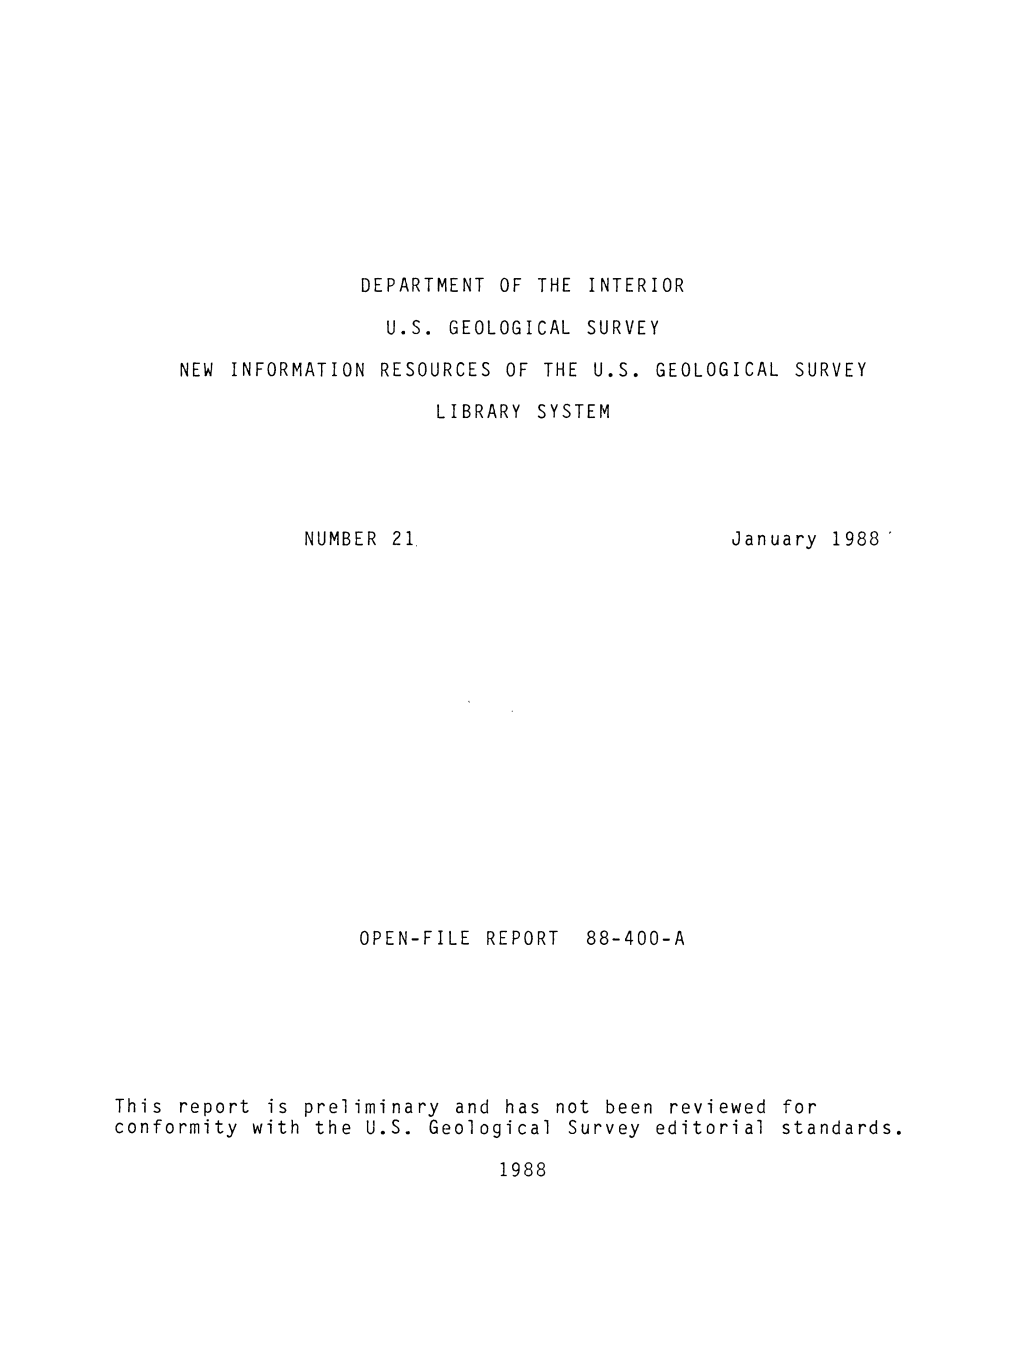 NUMBER 21. January 1988 This Report Is Preliminary and Has Not